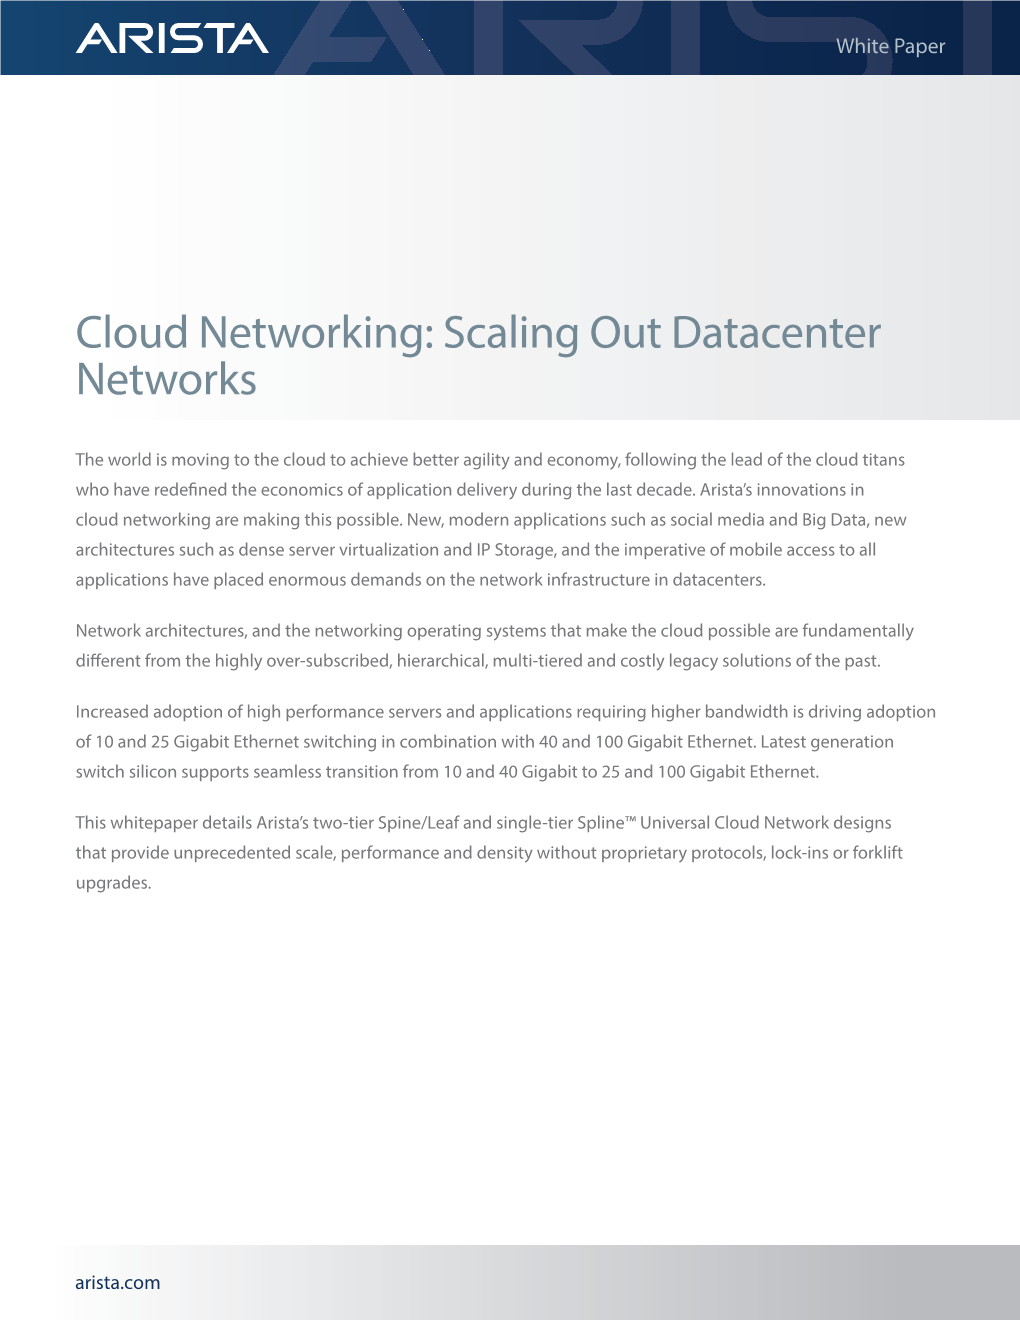 Cloud Networking: Scaling out Datacenter Networks